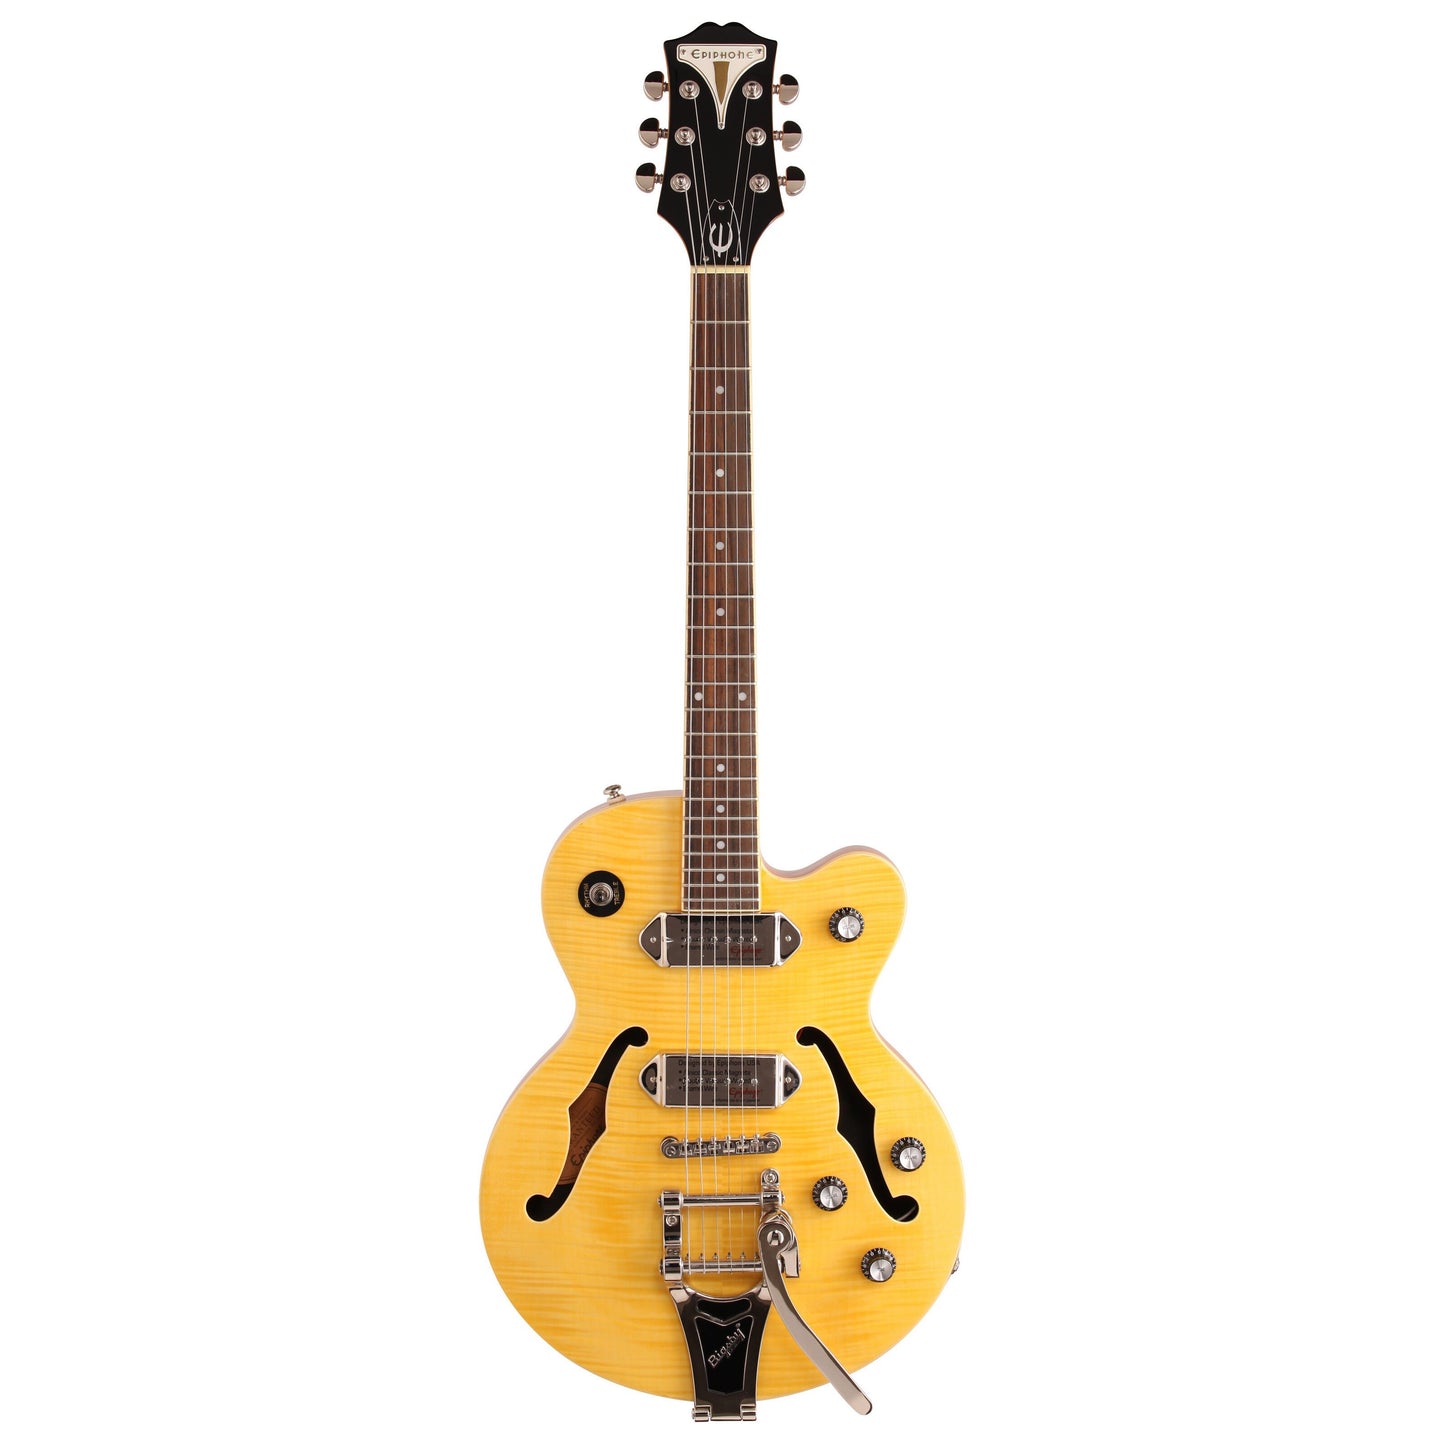 Epiphone Wildkat Electric Guitar with Bigsby Tremolo, Antique Natural